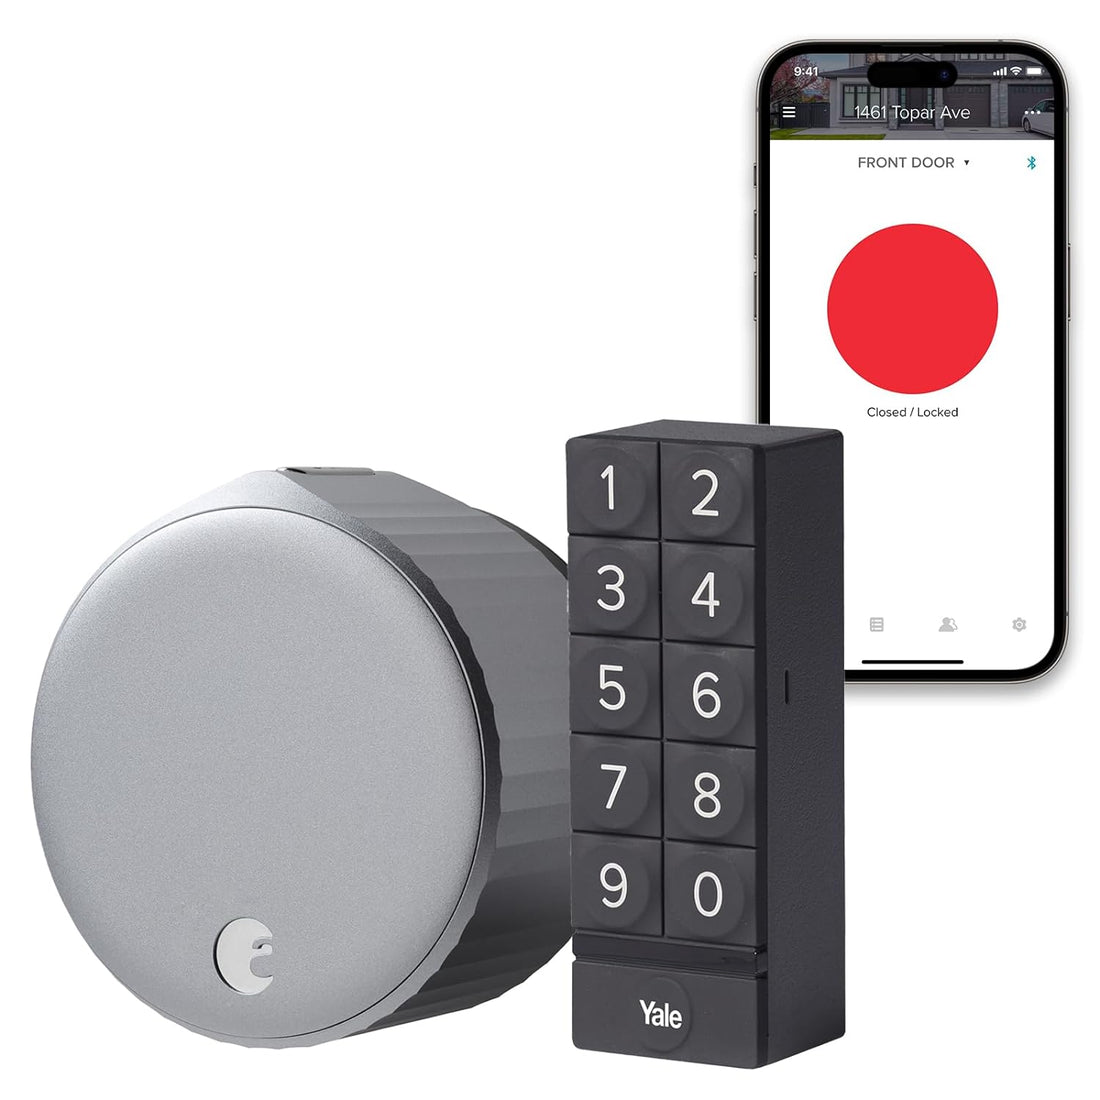 August Wi-Fi Smart Lock + Smart Keypad, Silver - Add Key-Free Access to Your Home - Great for Guests and Vacation rentals